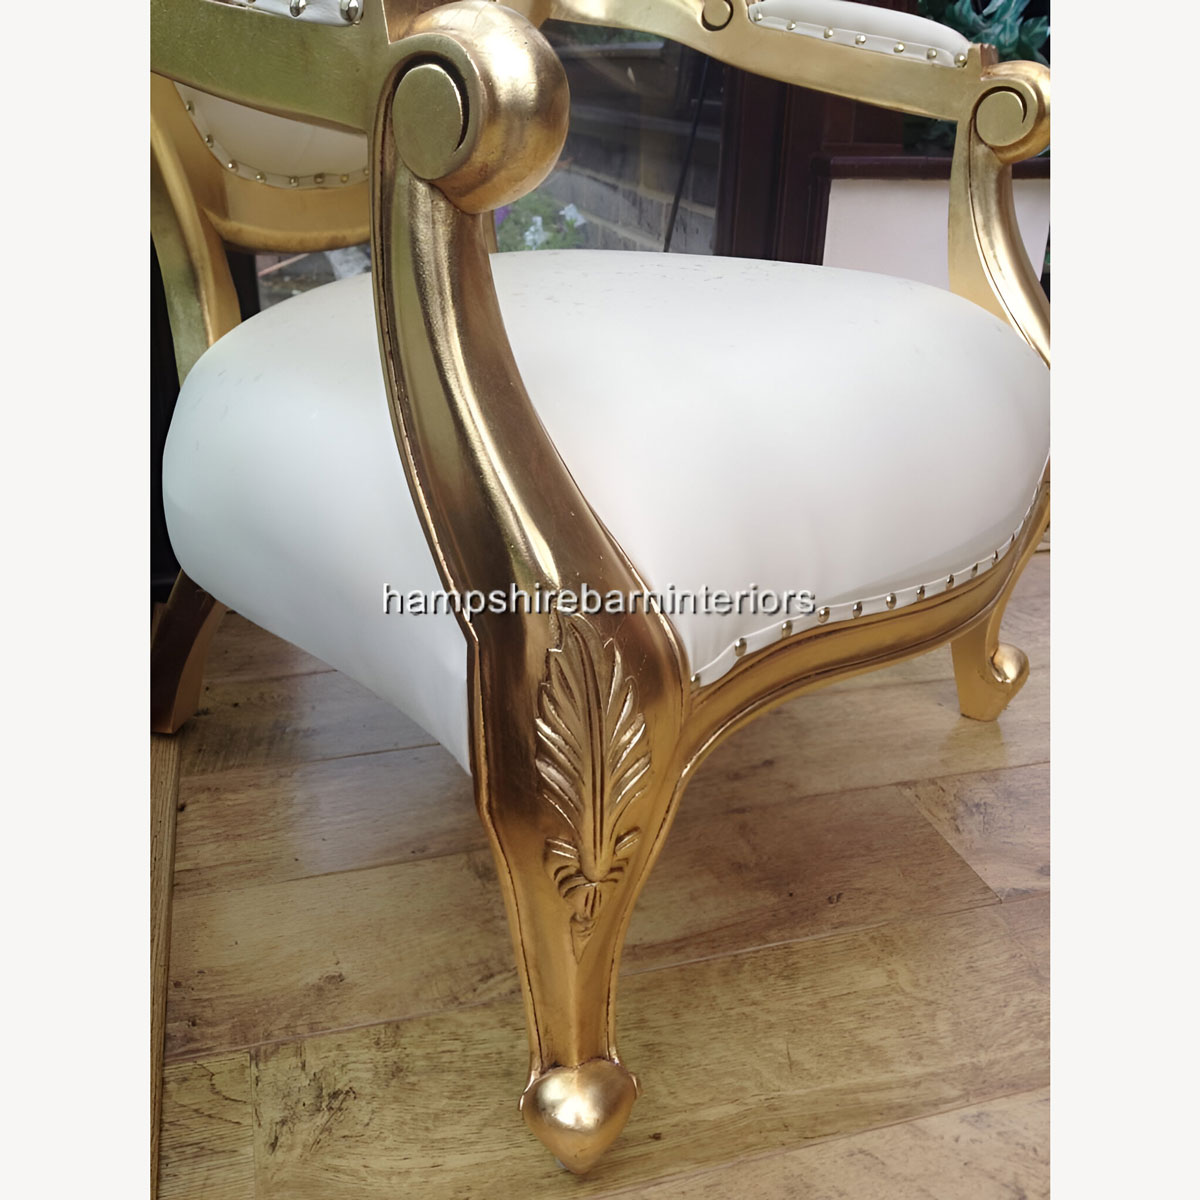 Chatsworth Chair In Gold Leaf And Cream Faux Leather Now With Diamond Crystal Buttons 5 - Hampshire Barn Interiors - Chatsworth Chair In Gold Leaf And Cream Faux Leather Now With Diamond Crystal Buttons -